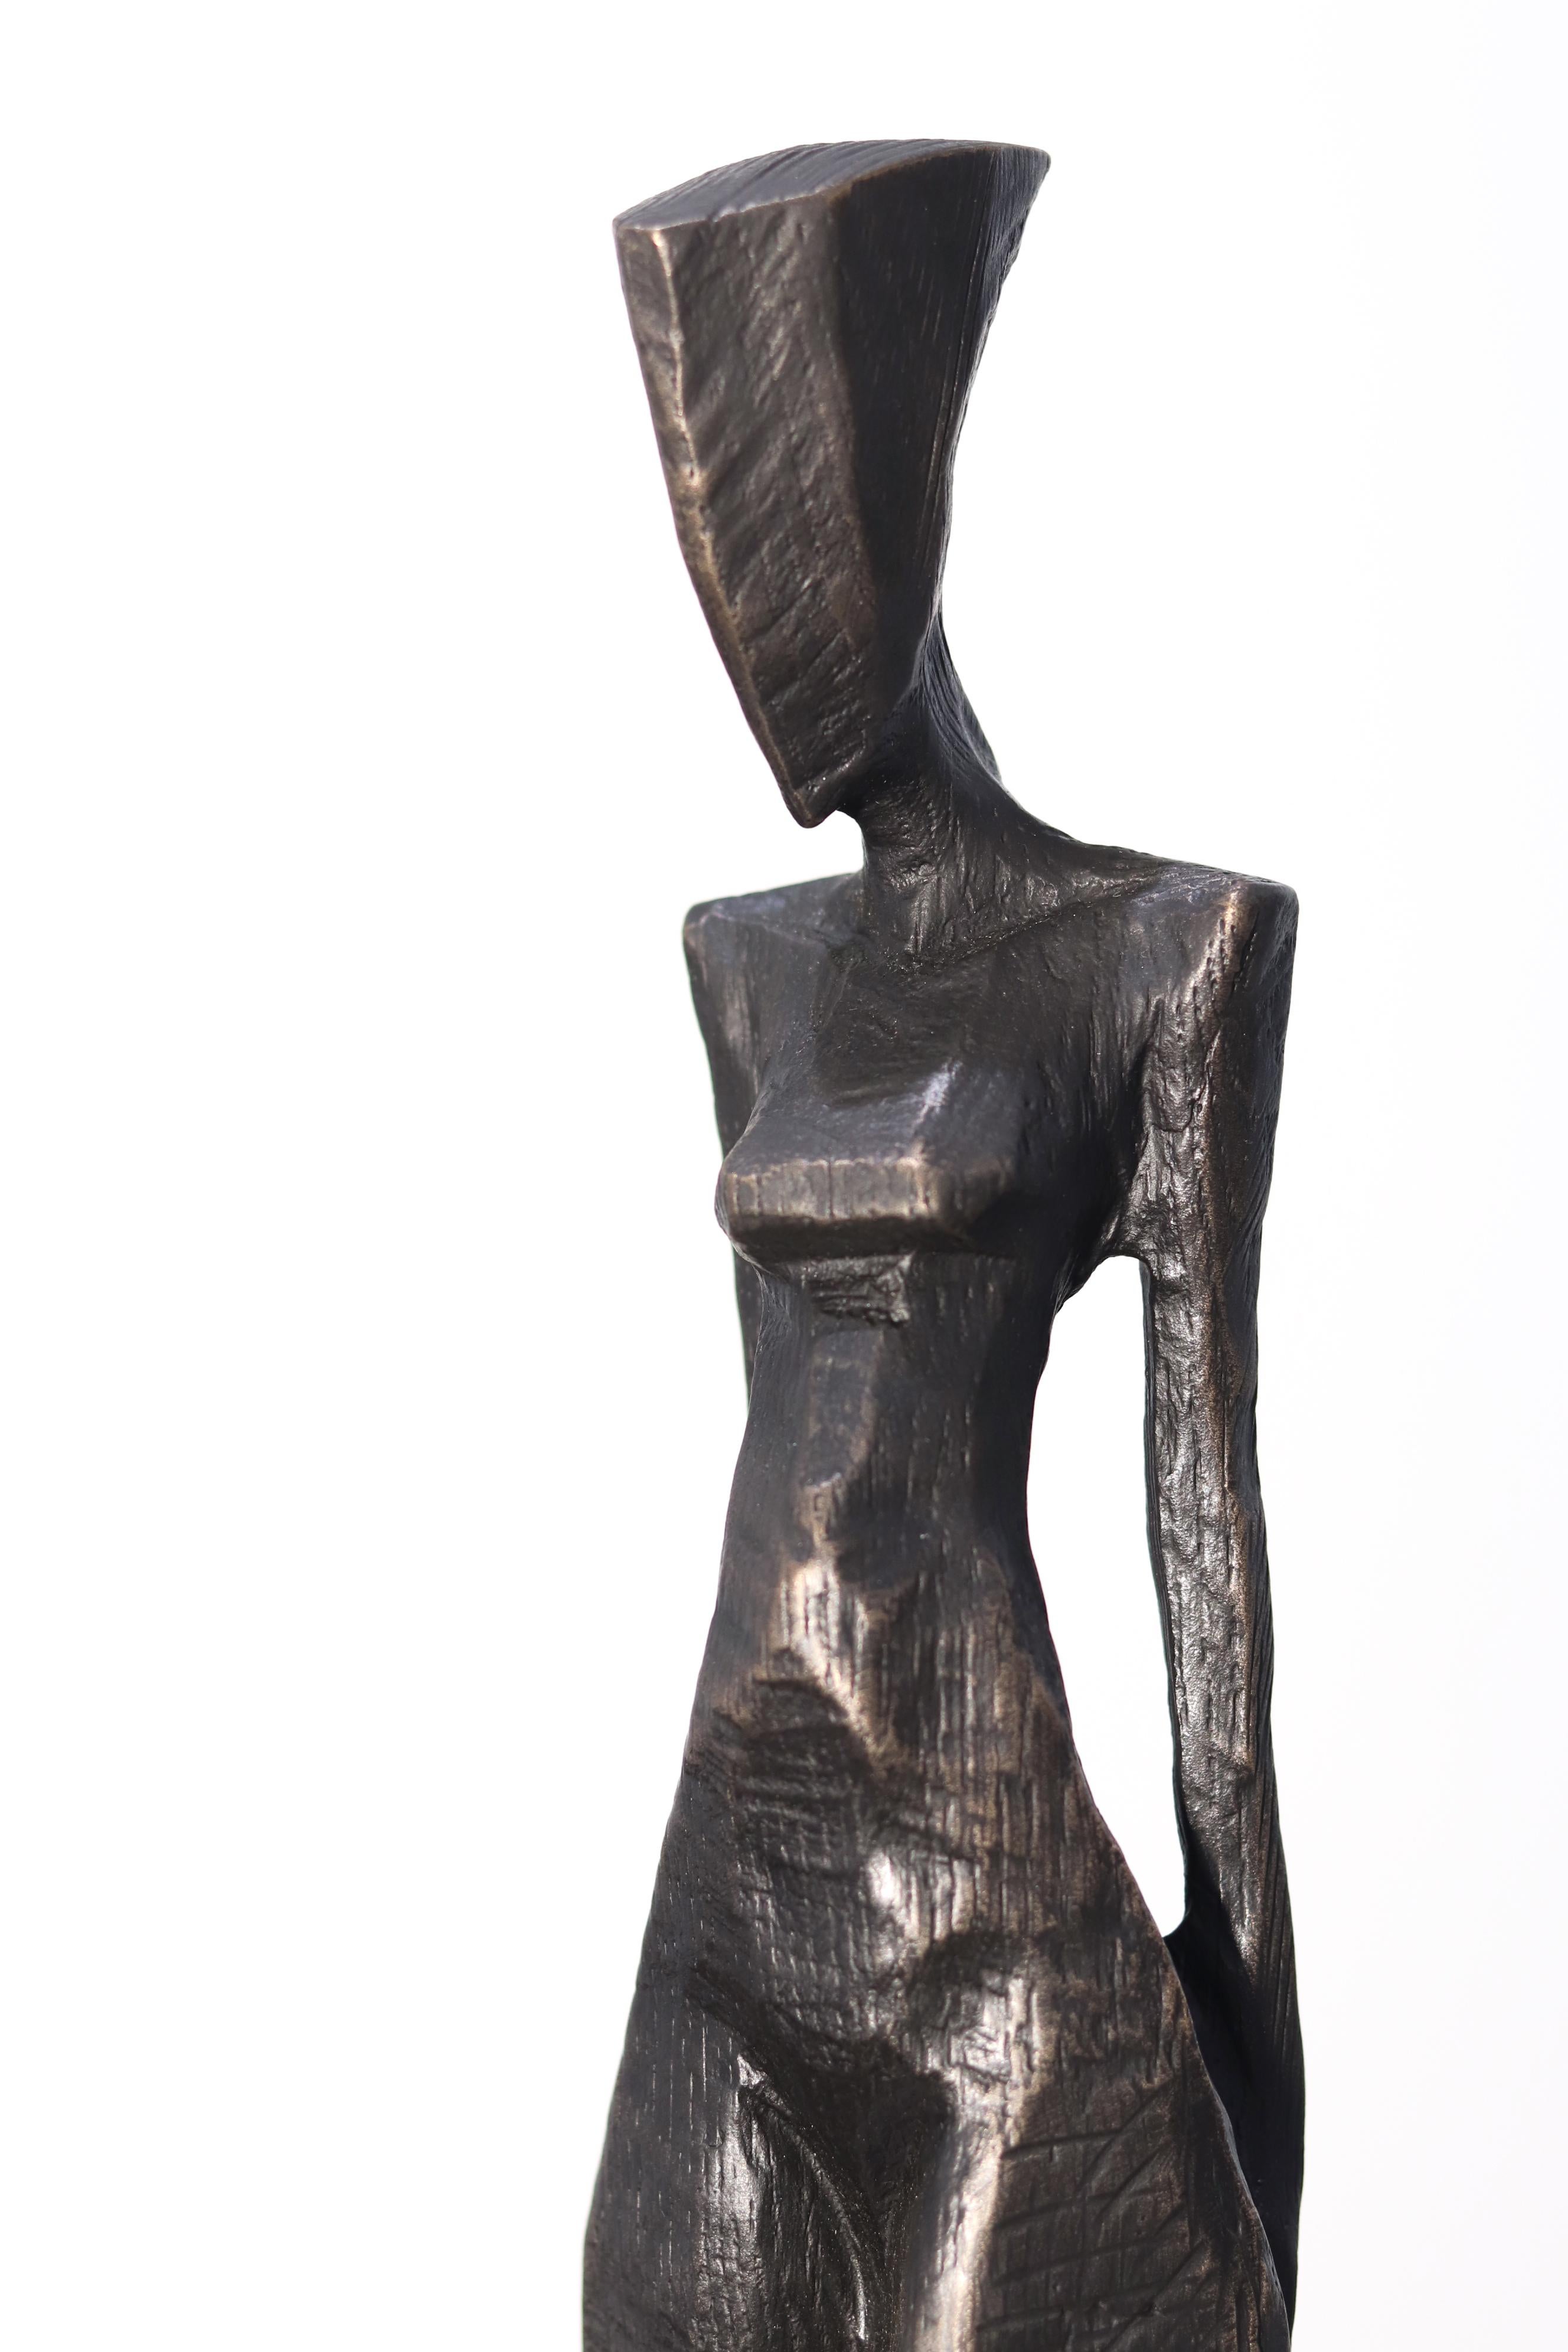 Nathalie - Large Tall Figurative Modern Abstract Cubism Solid Bronze Sculpture - Gold Nude Sculpture by Nando Kallweit